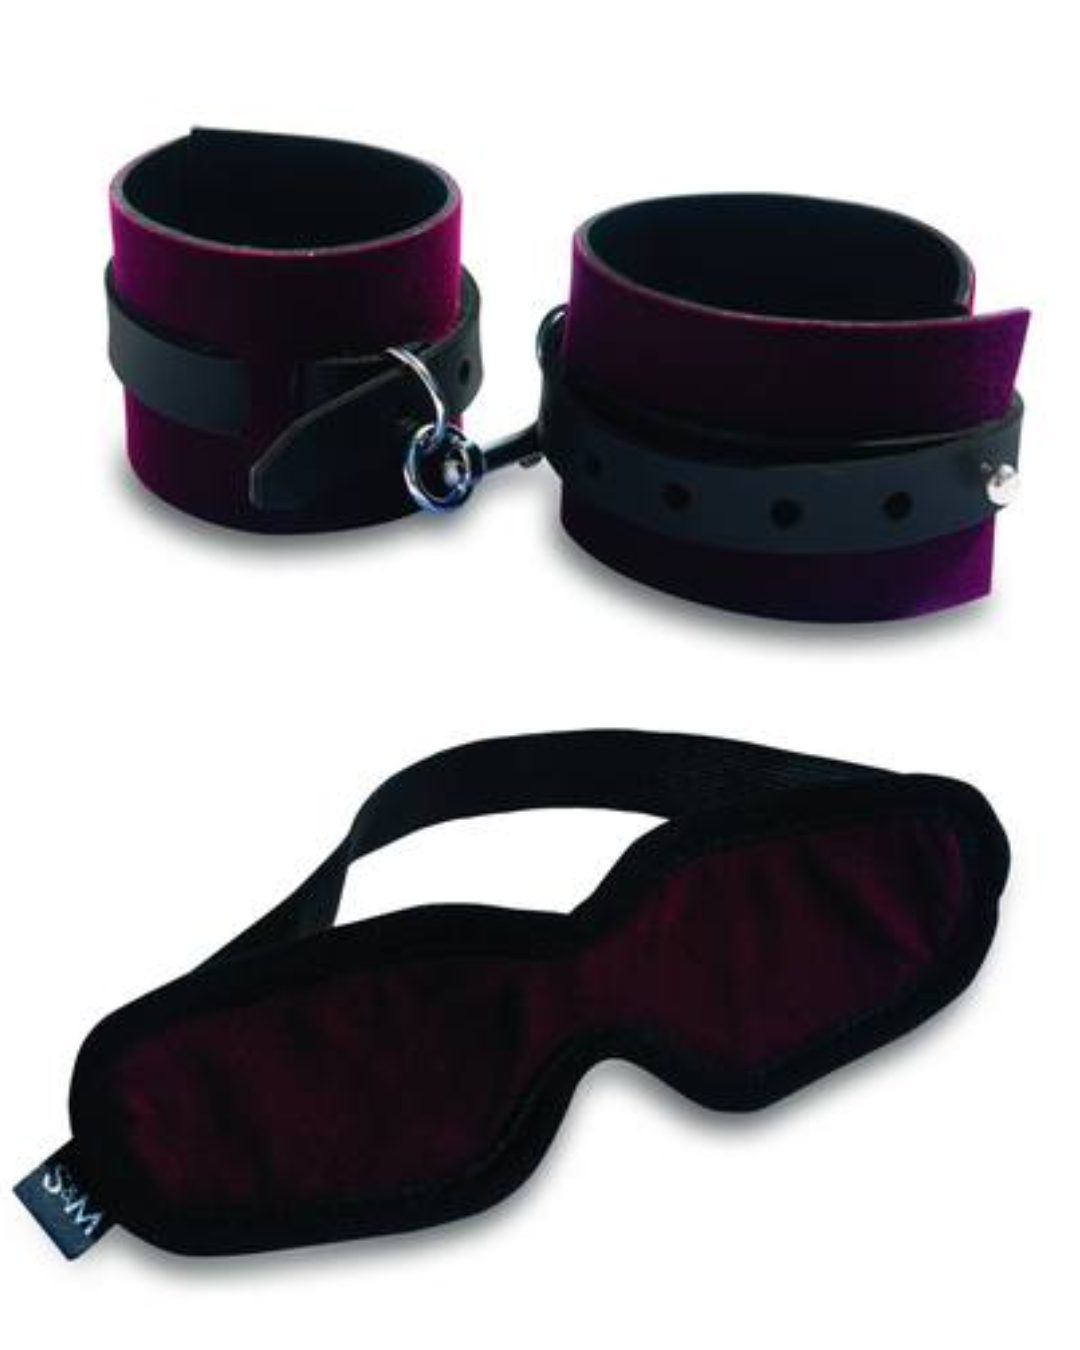 Sex and Mischief Enchanted Cuffs and Blindfold Kit by Sportsheets